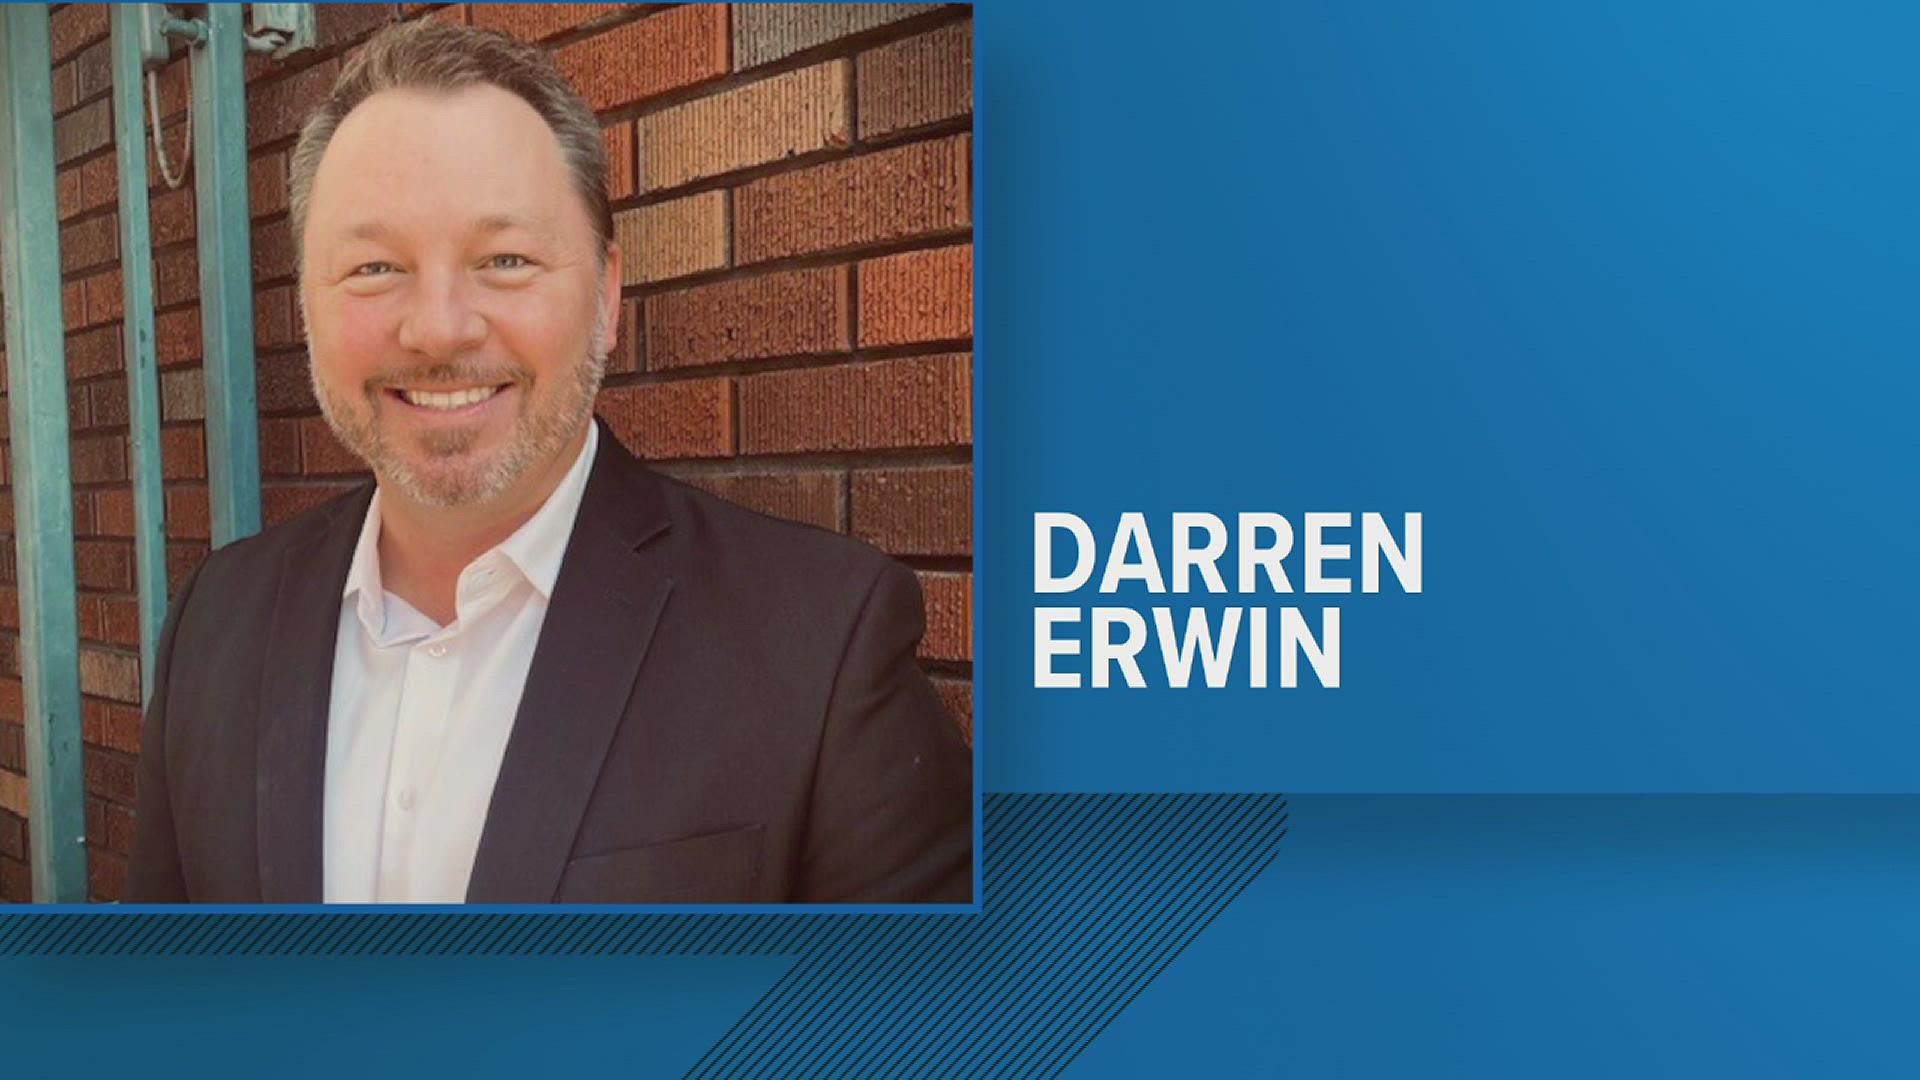 Darren Erwin will take over from Liz Fredrichs who has led the organization for the past five years.